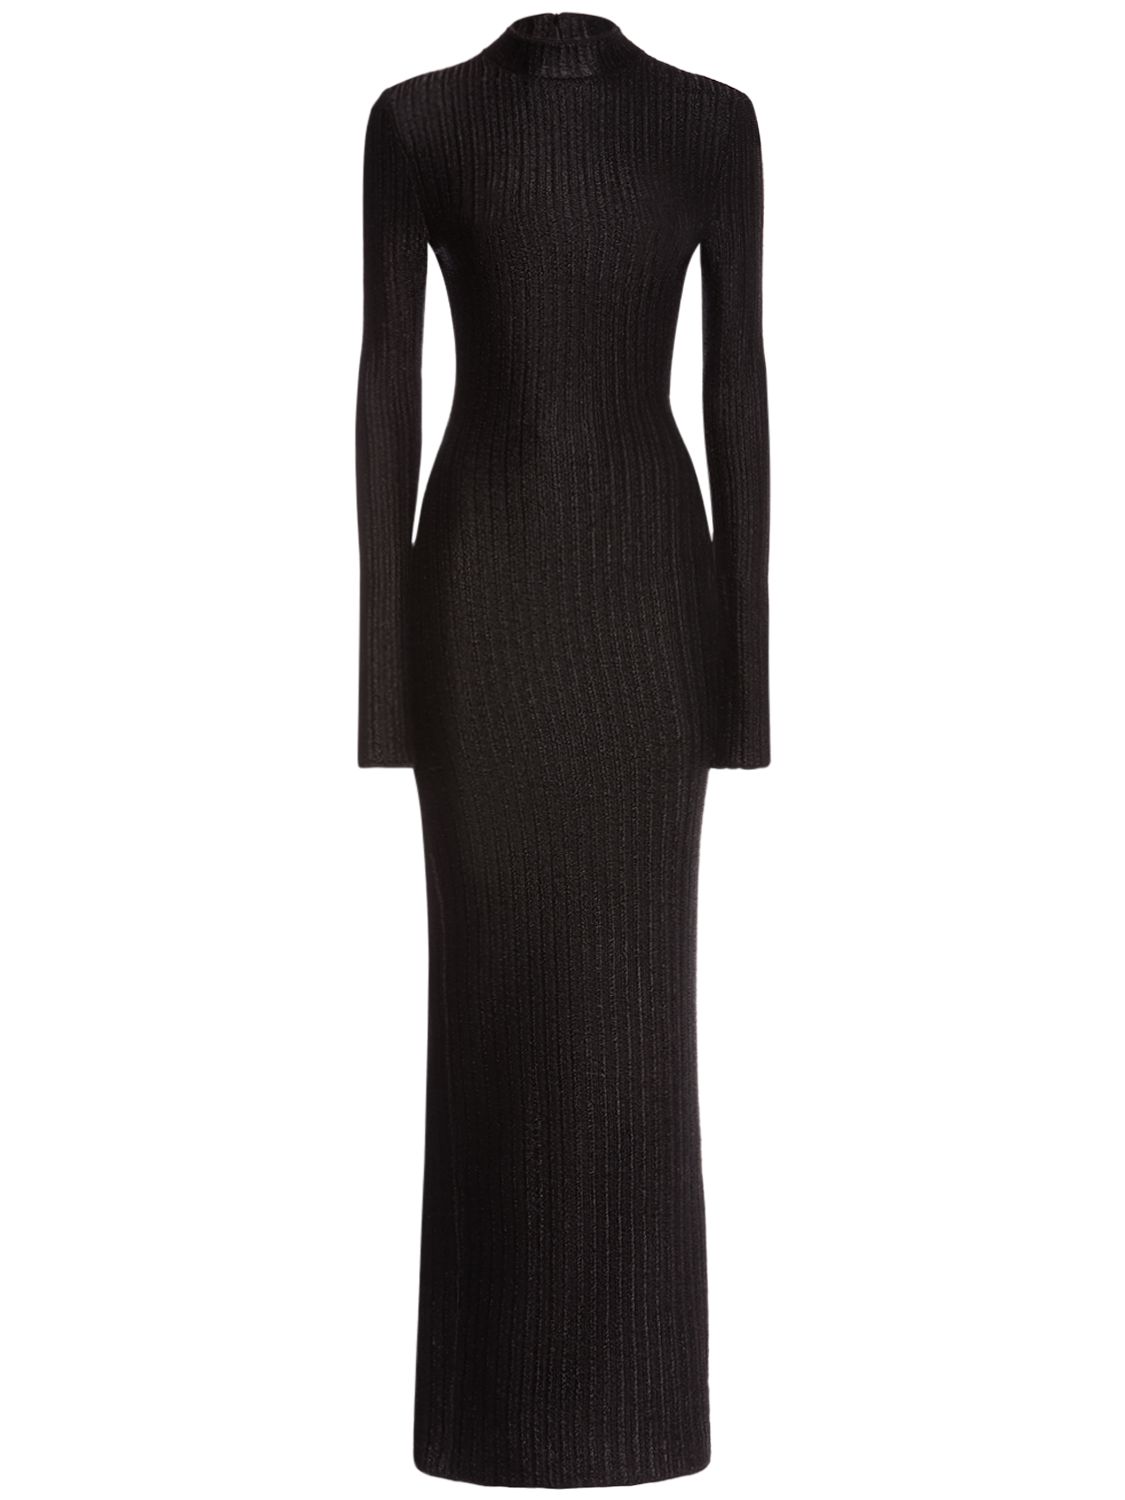 Tom Ford Buckle-detail Strapless Sable Gown in Black